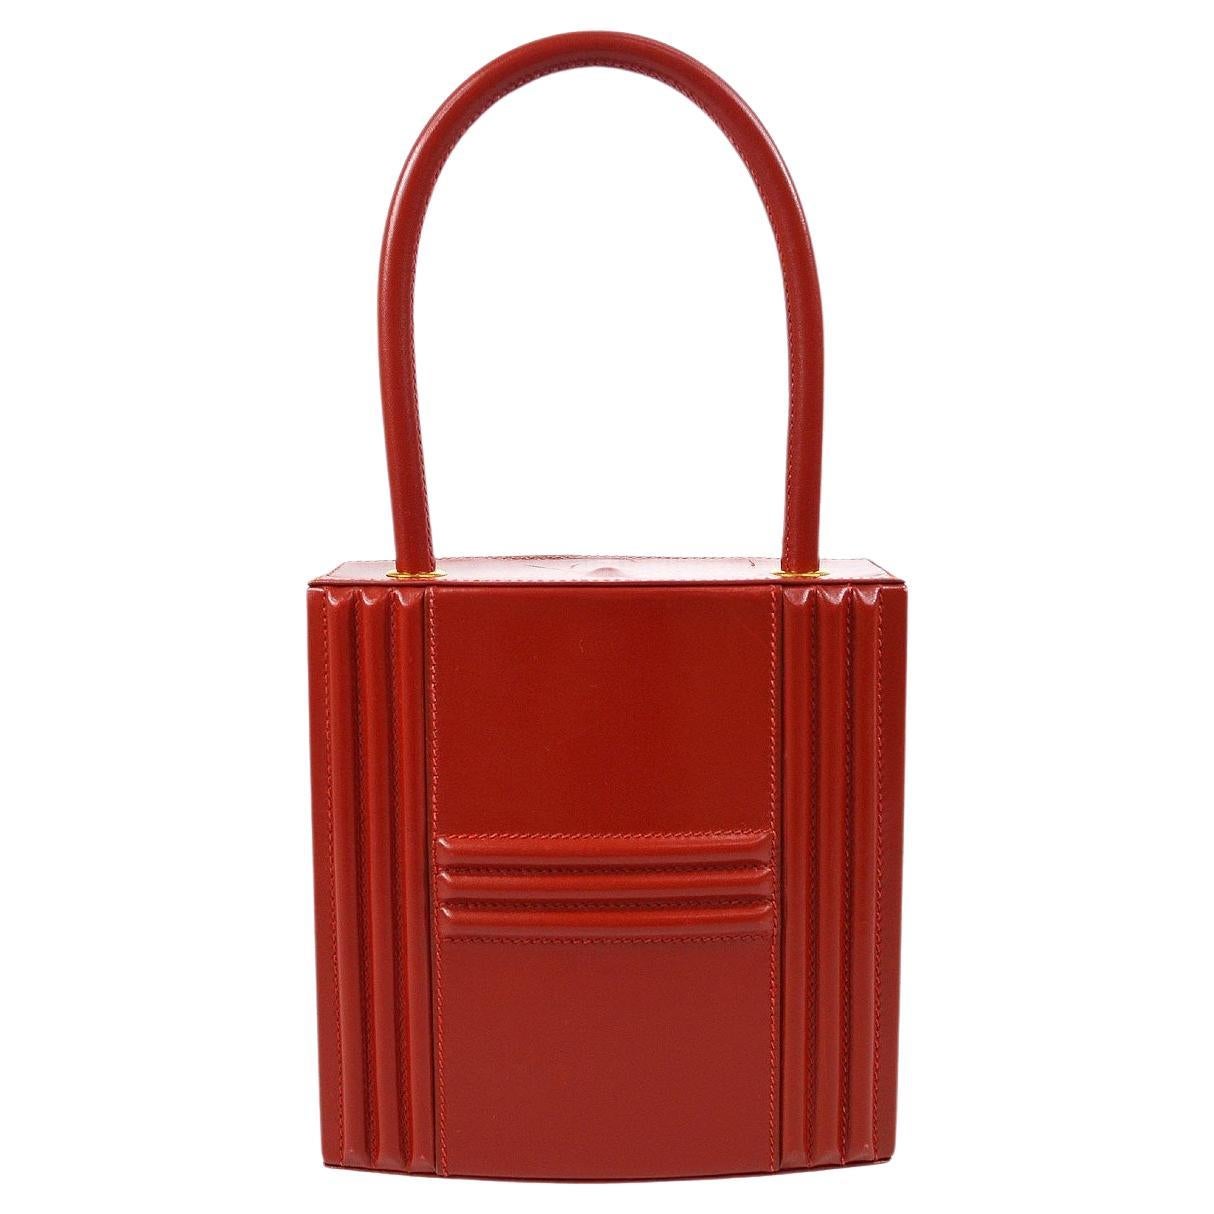 HERMES Red Cadena Kelly Box Calf Leather Gold Hardware Top Handle Evening Bag